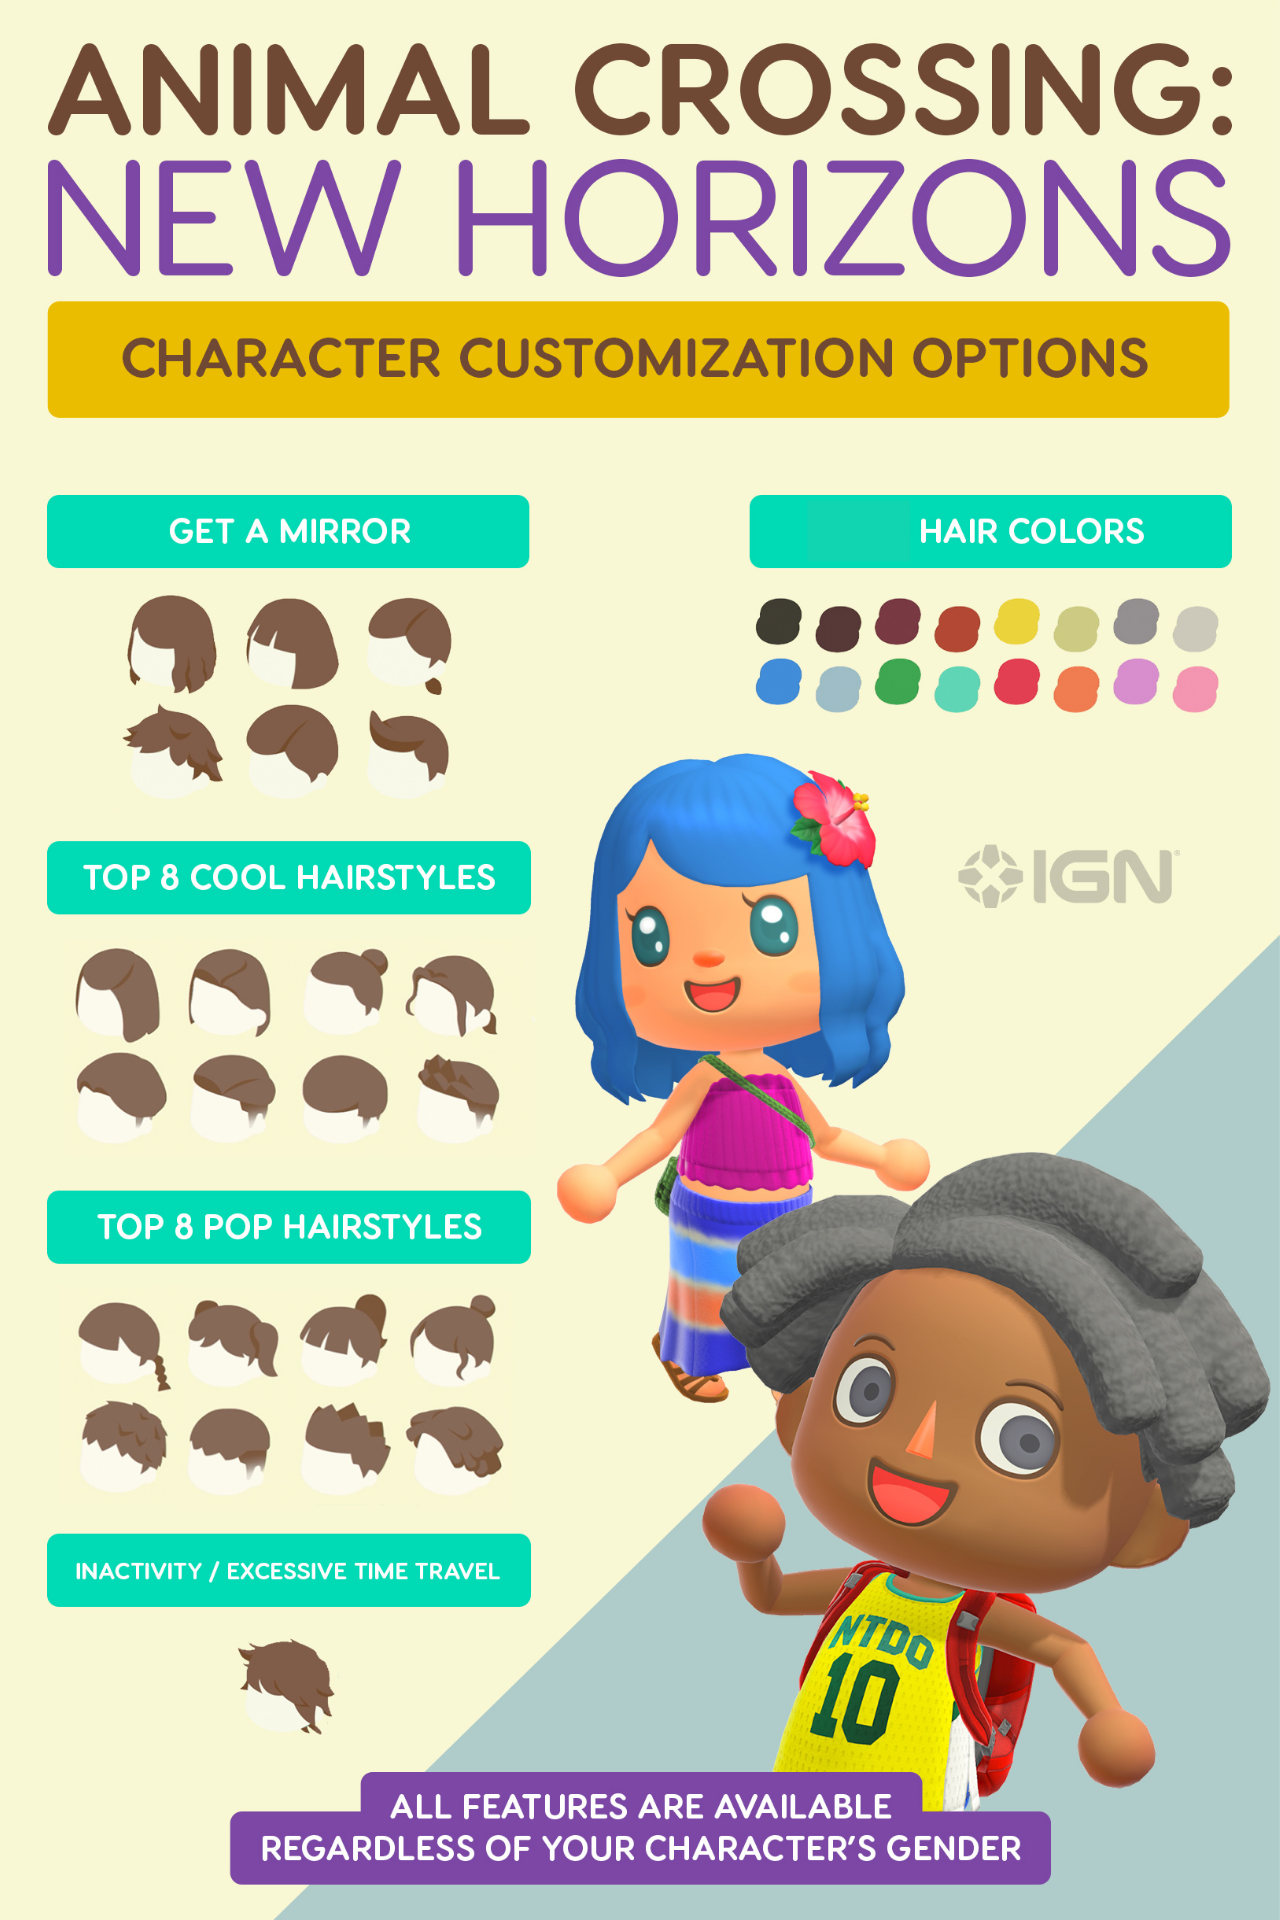 Spring hair colors latest trends for 2021. All Hairstyles And Hair Colors Guide Animal Crossing New Horizons Wiki Guide Ign